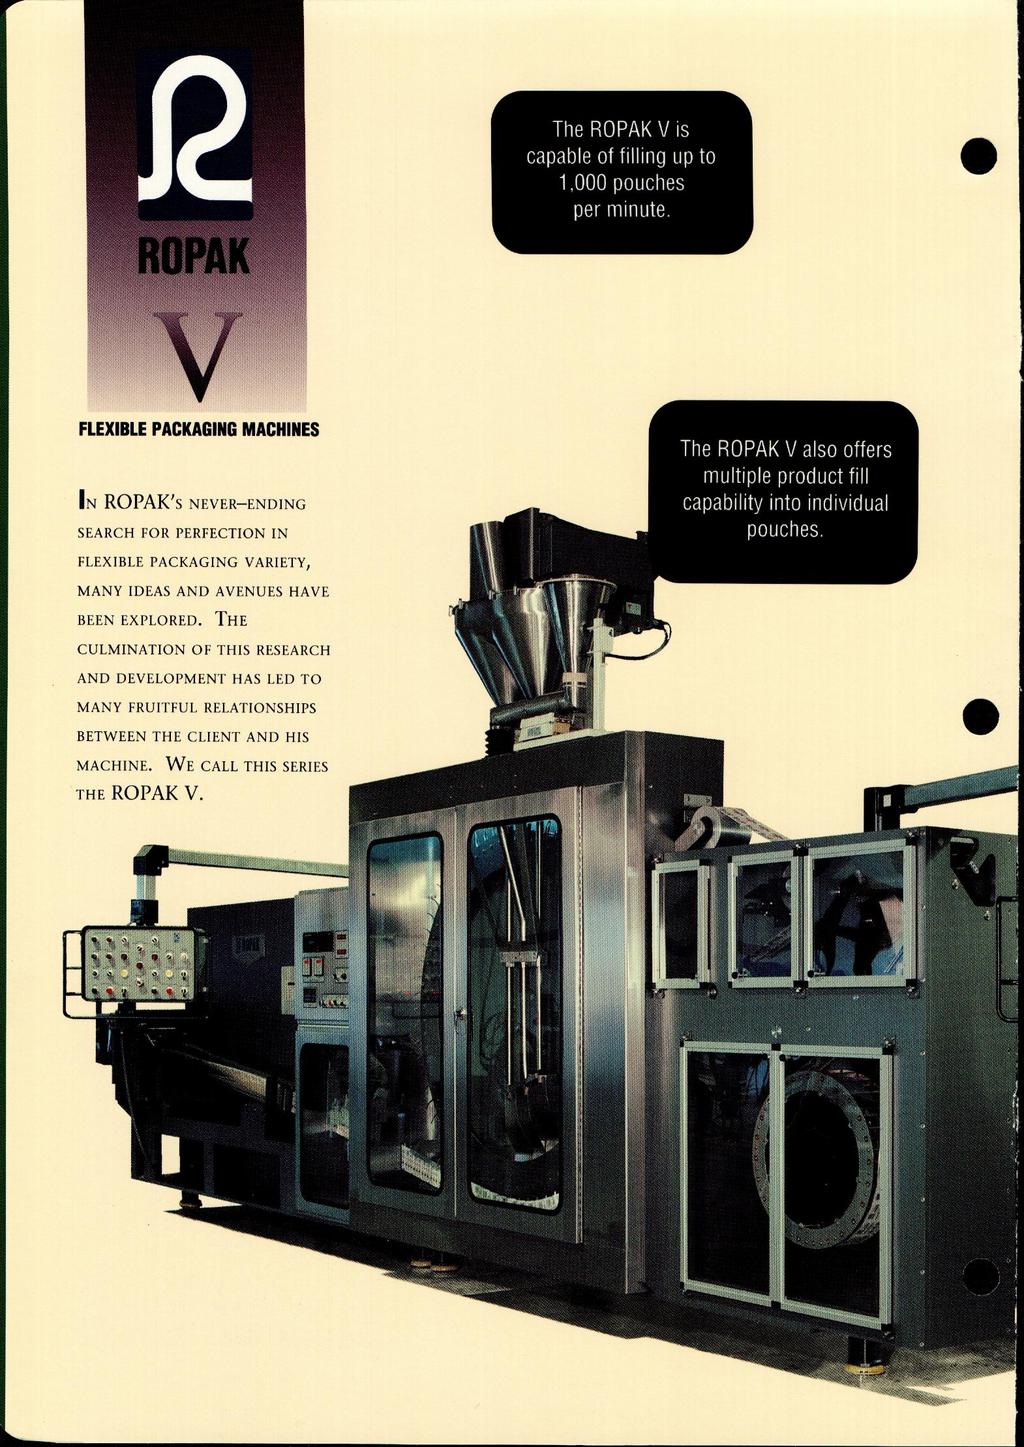 The ROPAK V is capable of filling up to 1,000 pouches per minute.